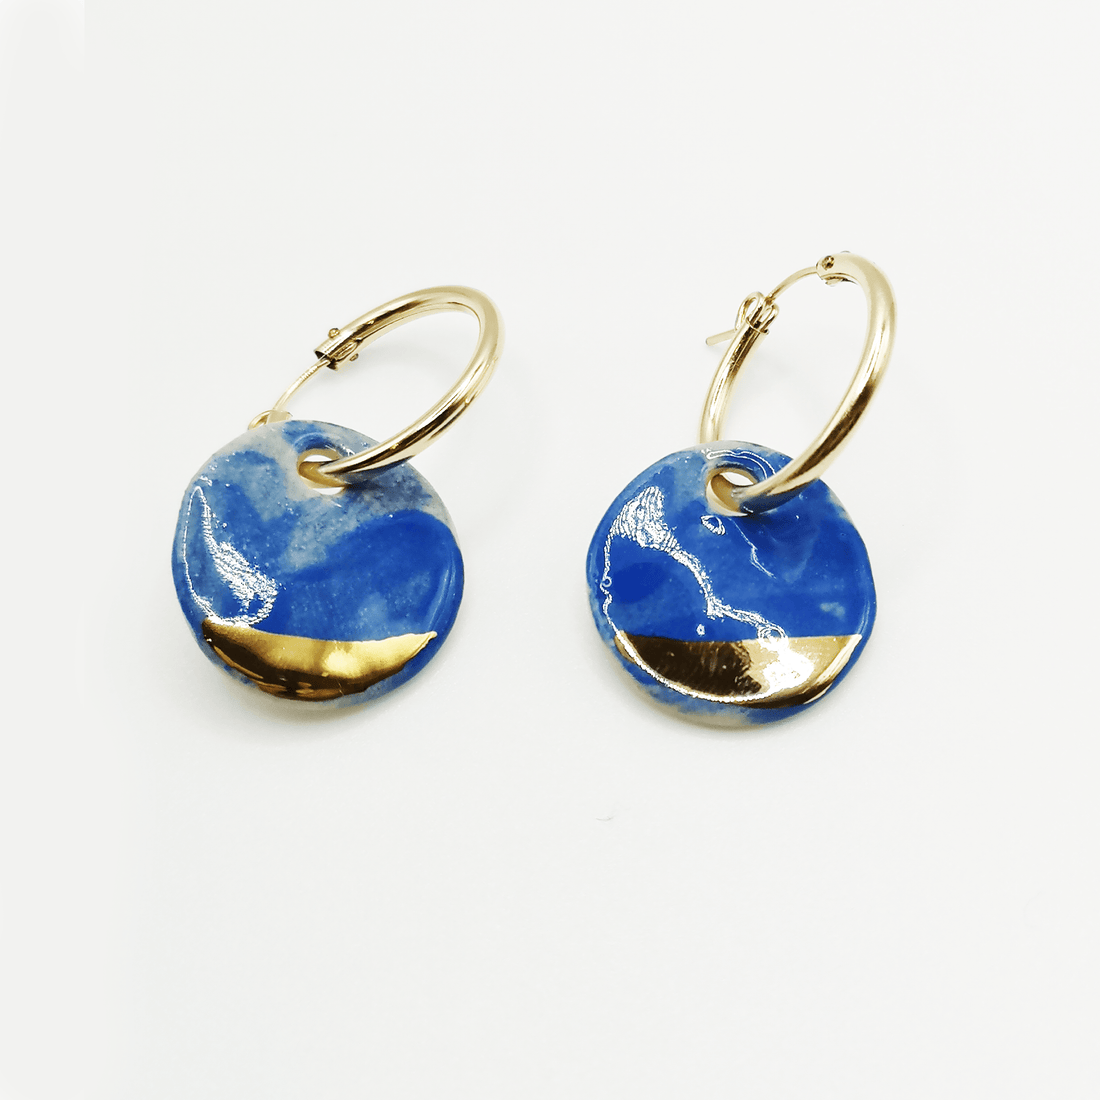 Boucles d'oreilles bleu Klein or Gold filled pour grand mere Luxe chic